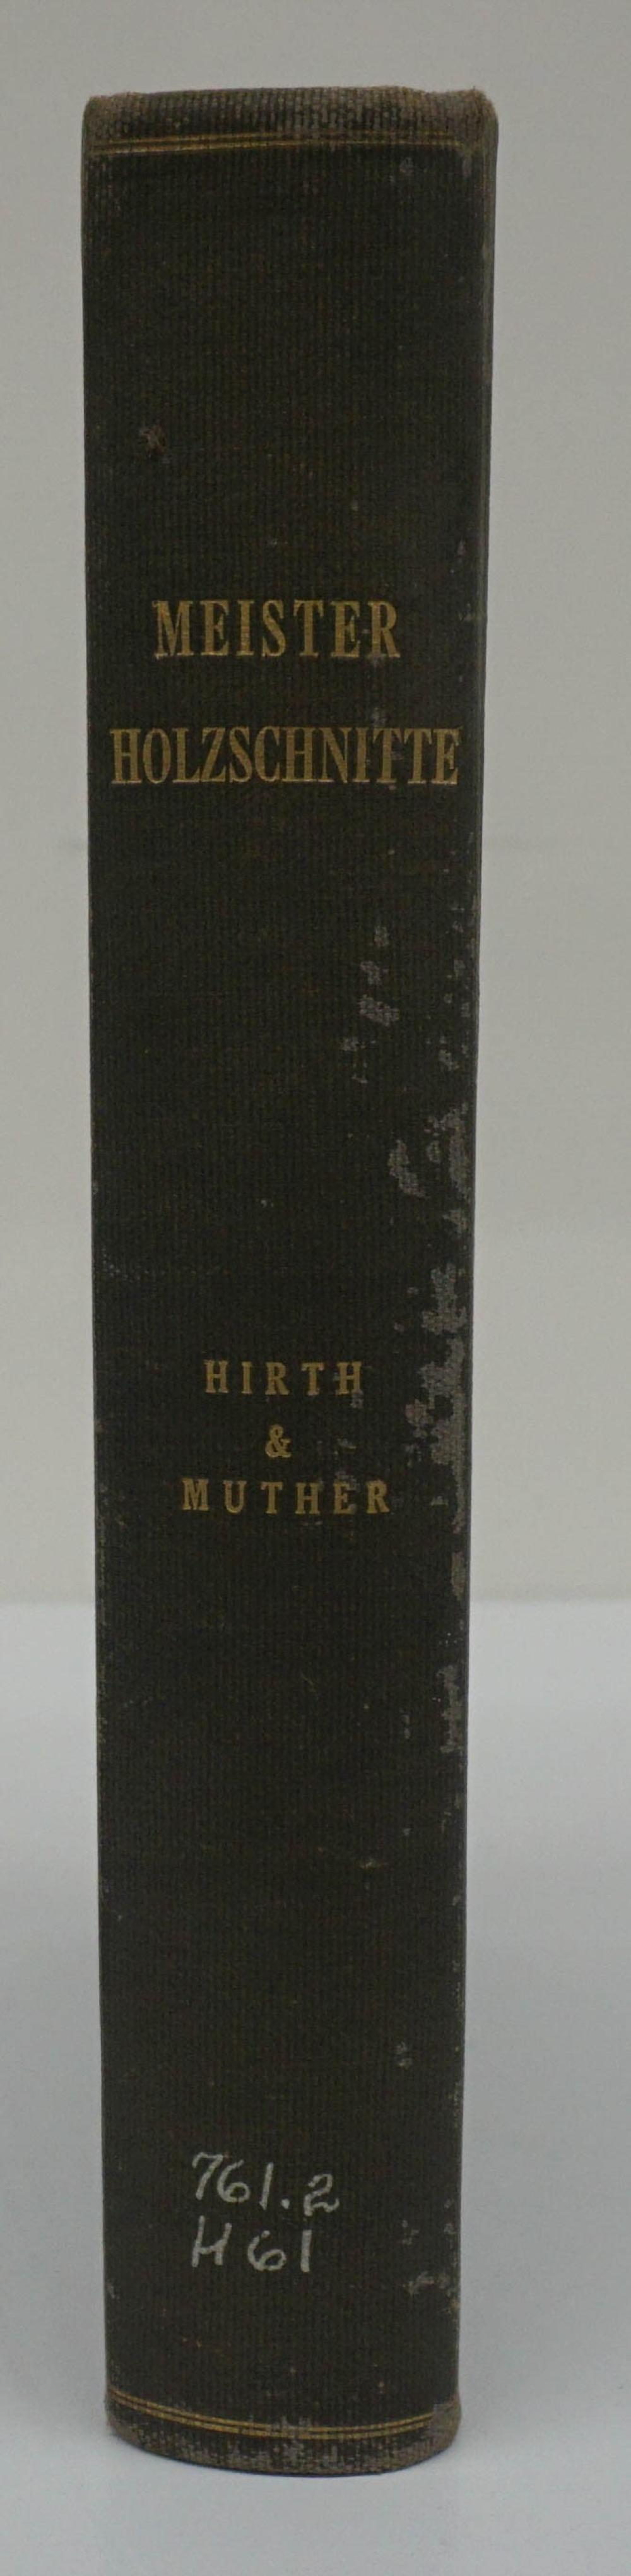 GEORG HIRTH AND RICHARD MUTHER,